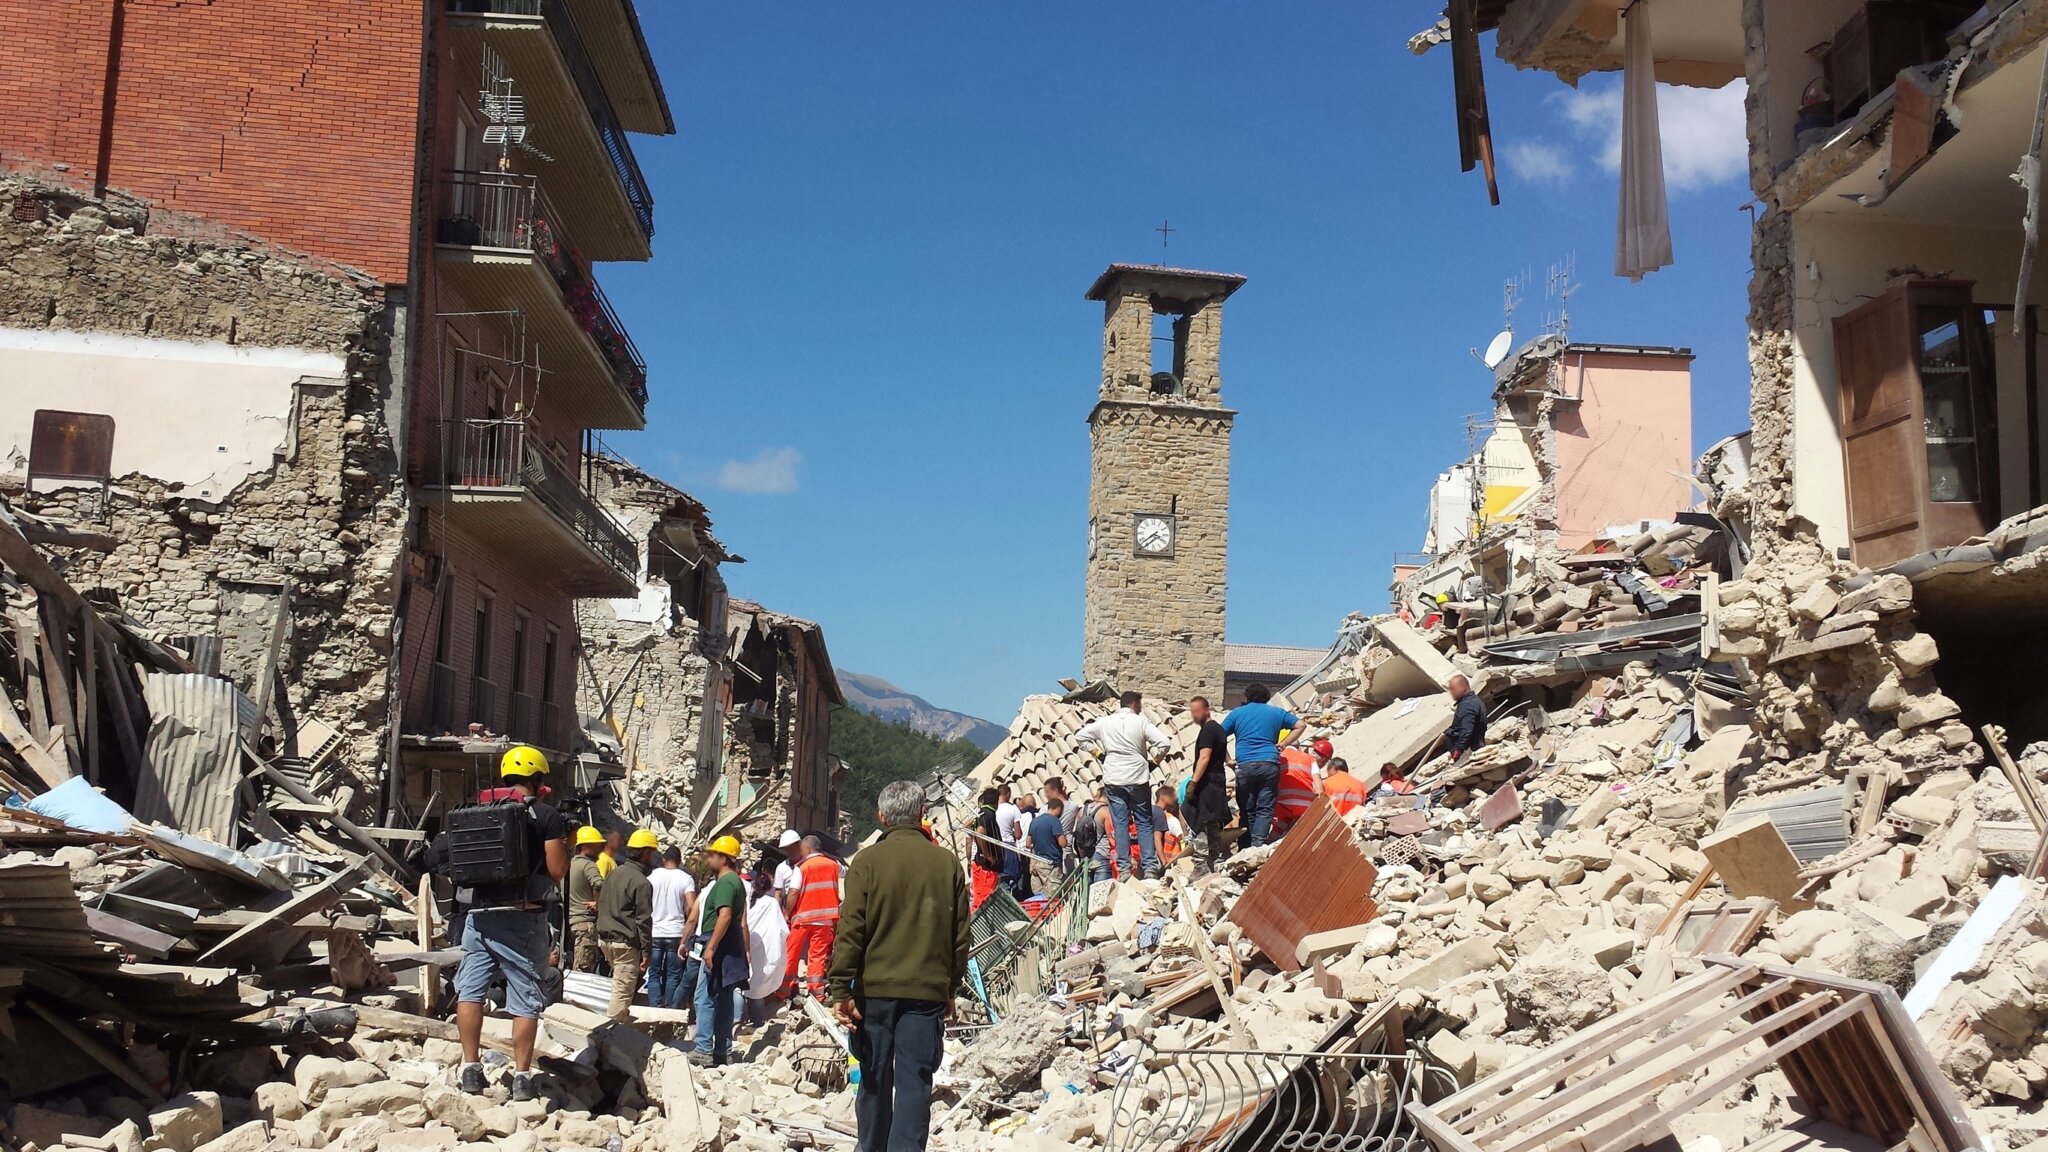 Amatrice on 24 August, 2016 after the earthquake